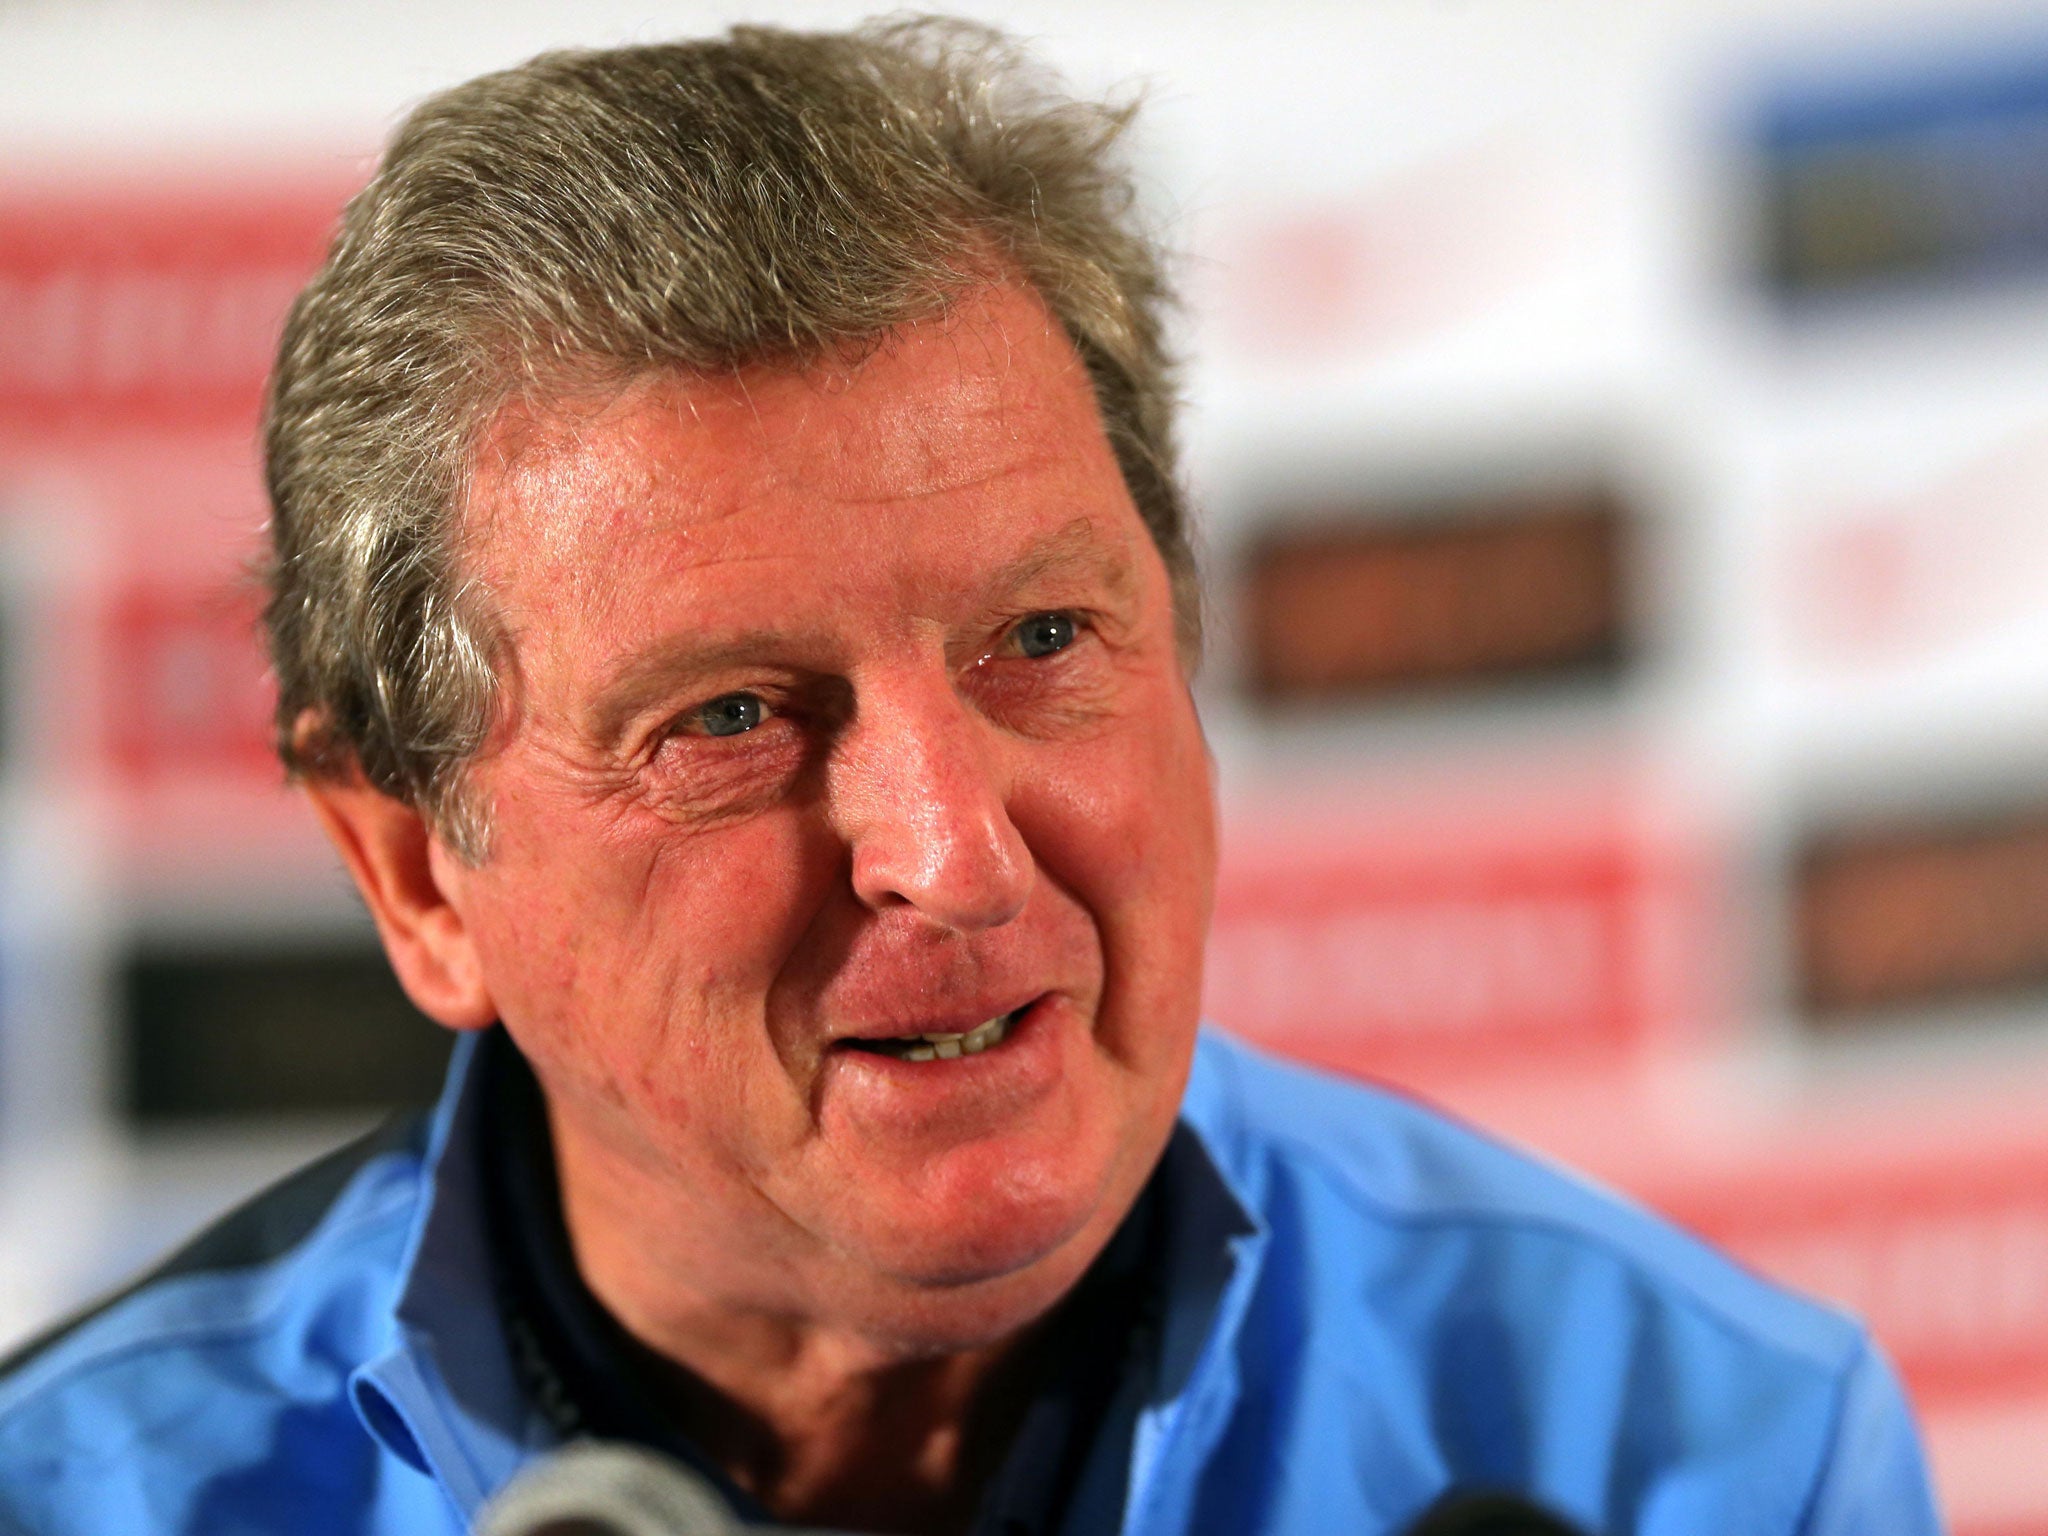 Roy Hodgson says he would make no excuses in the event of failure